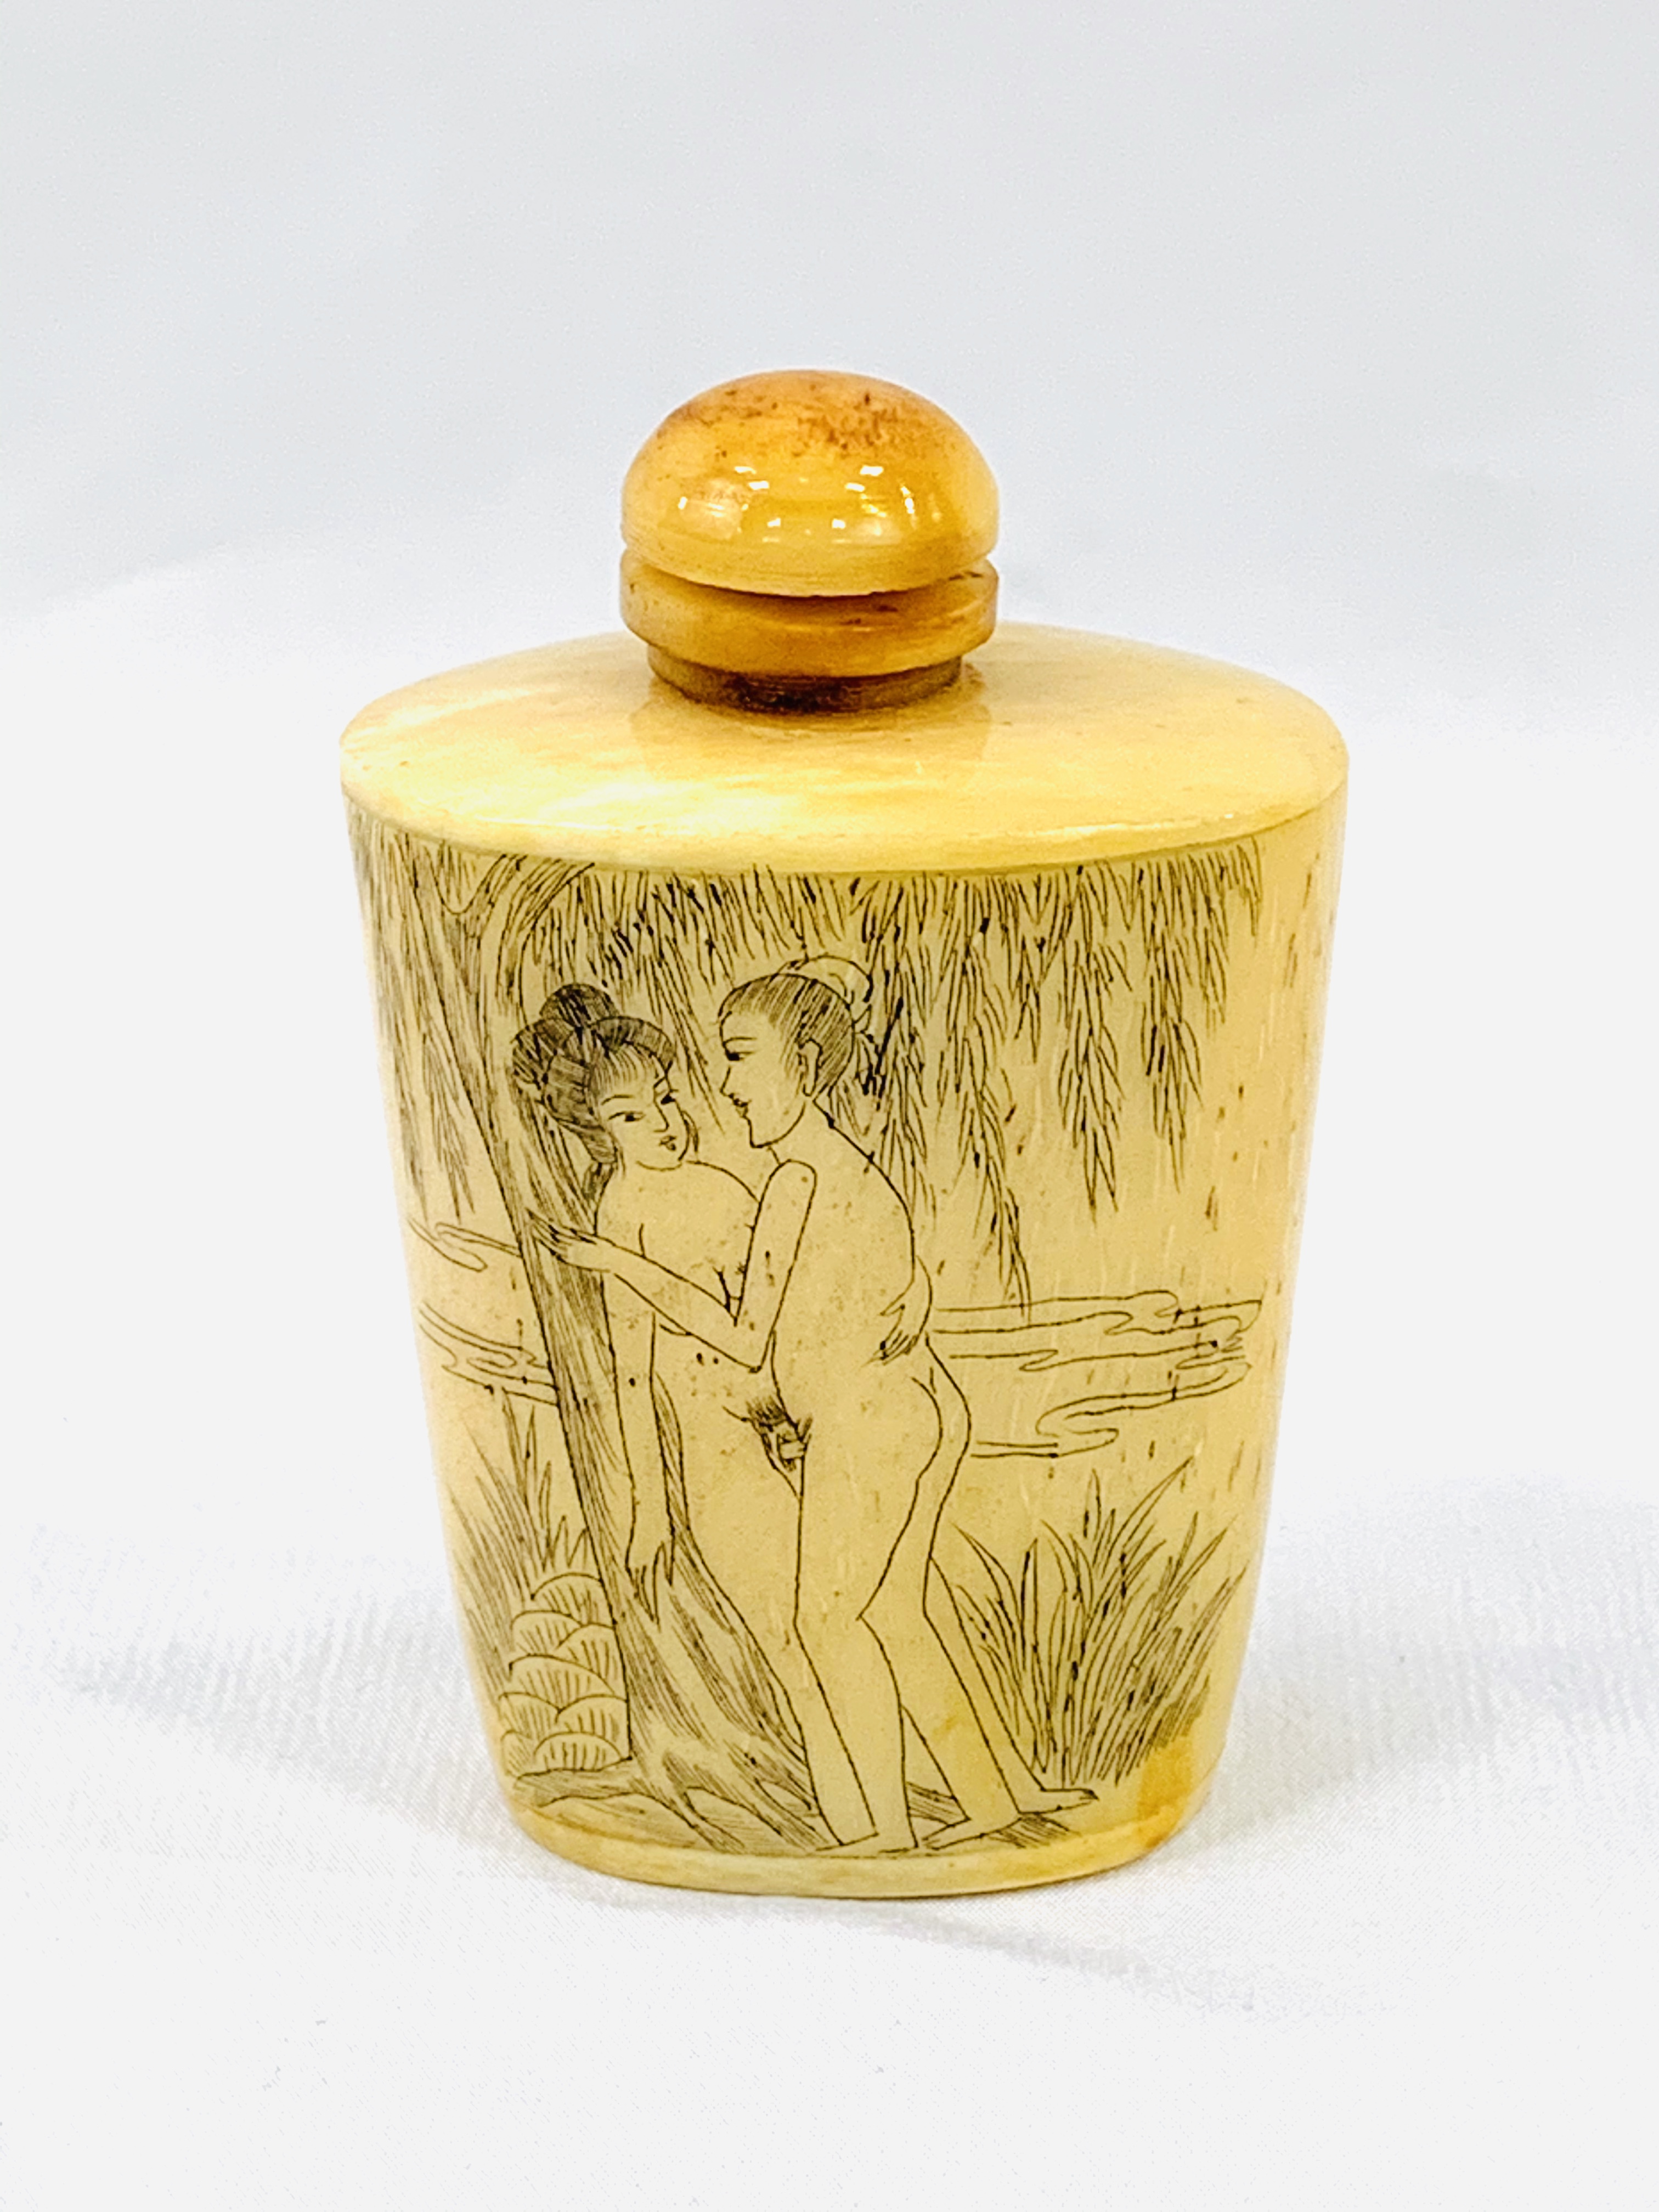 Cone shaped Chinese snuff bottle with dipper, featuring an erotic scene.